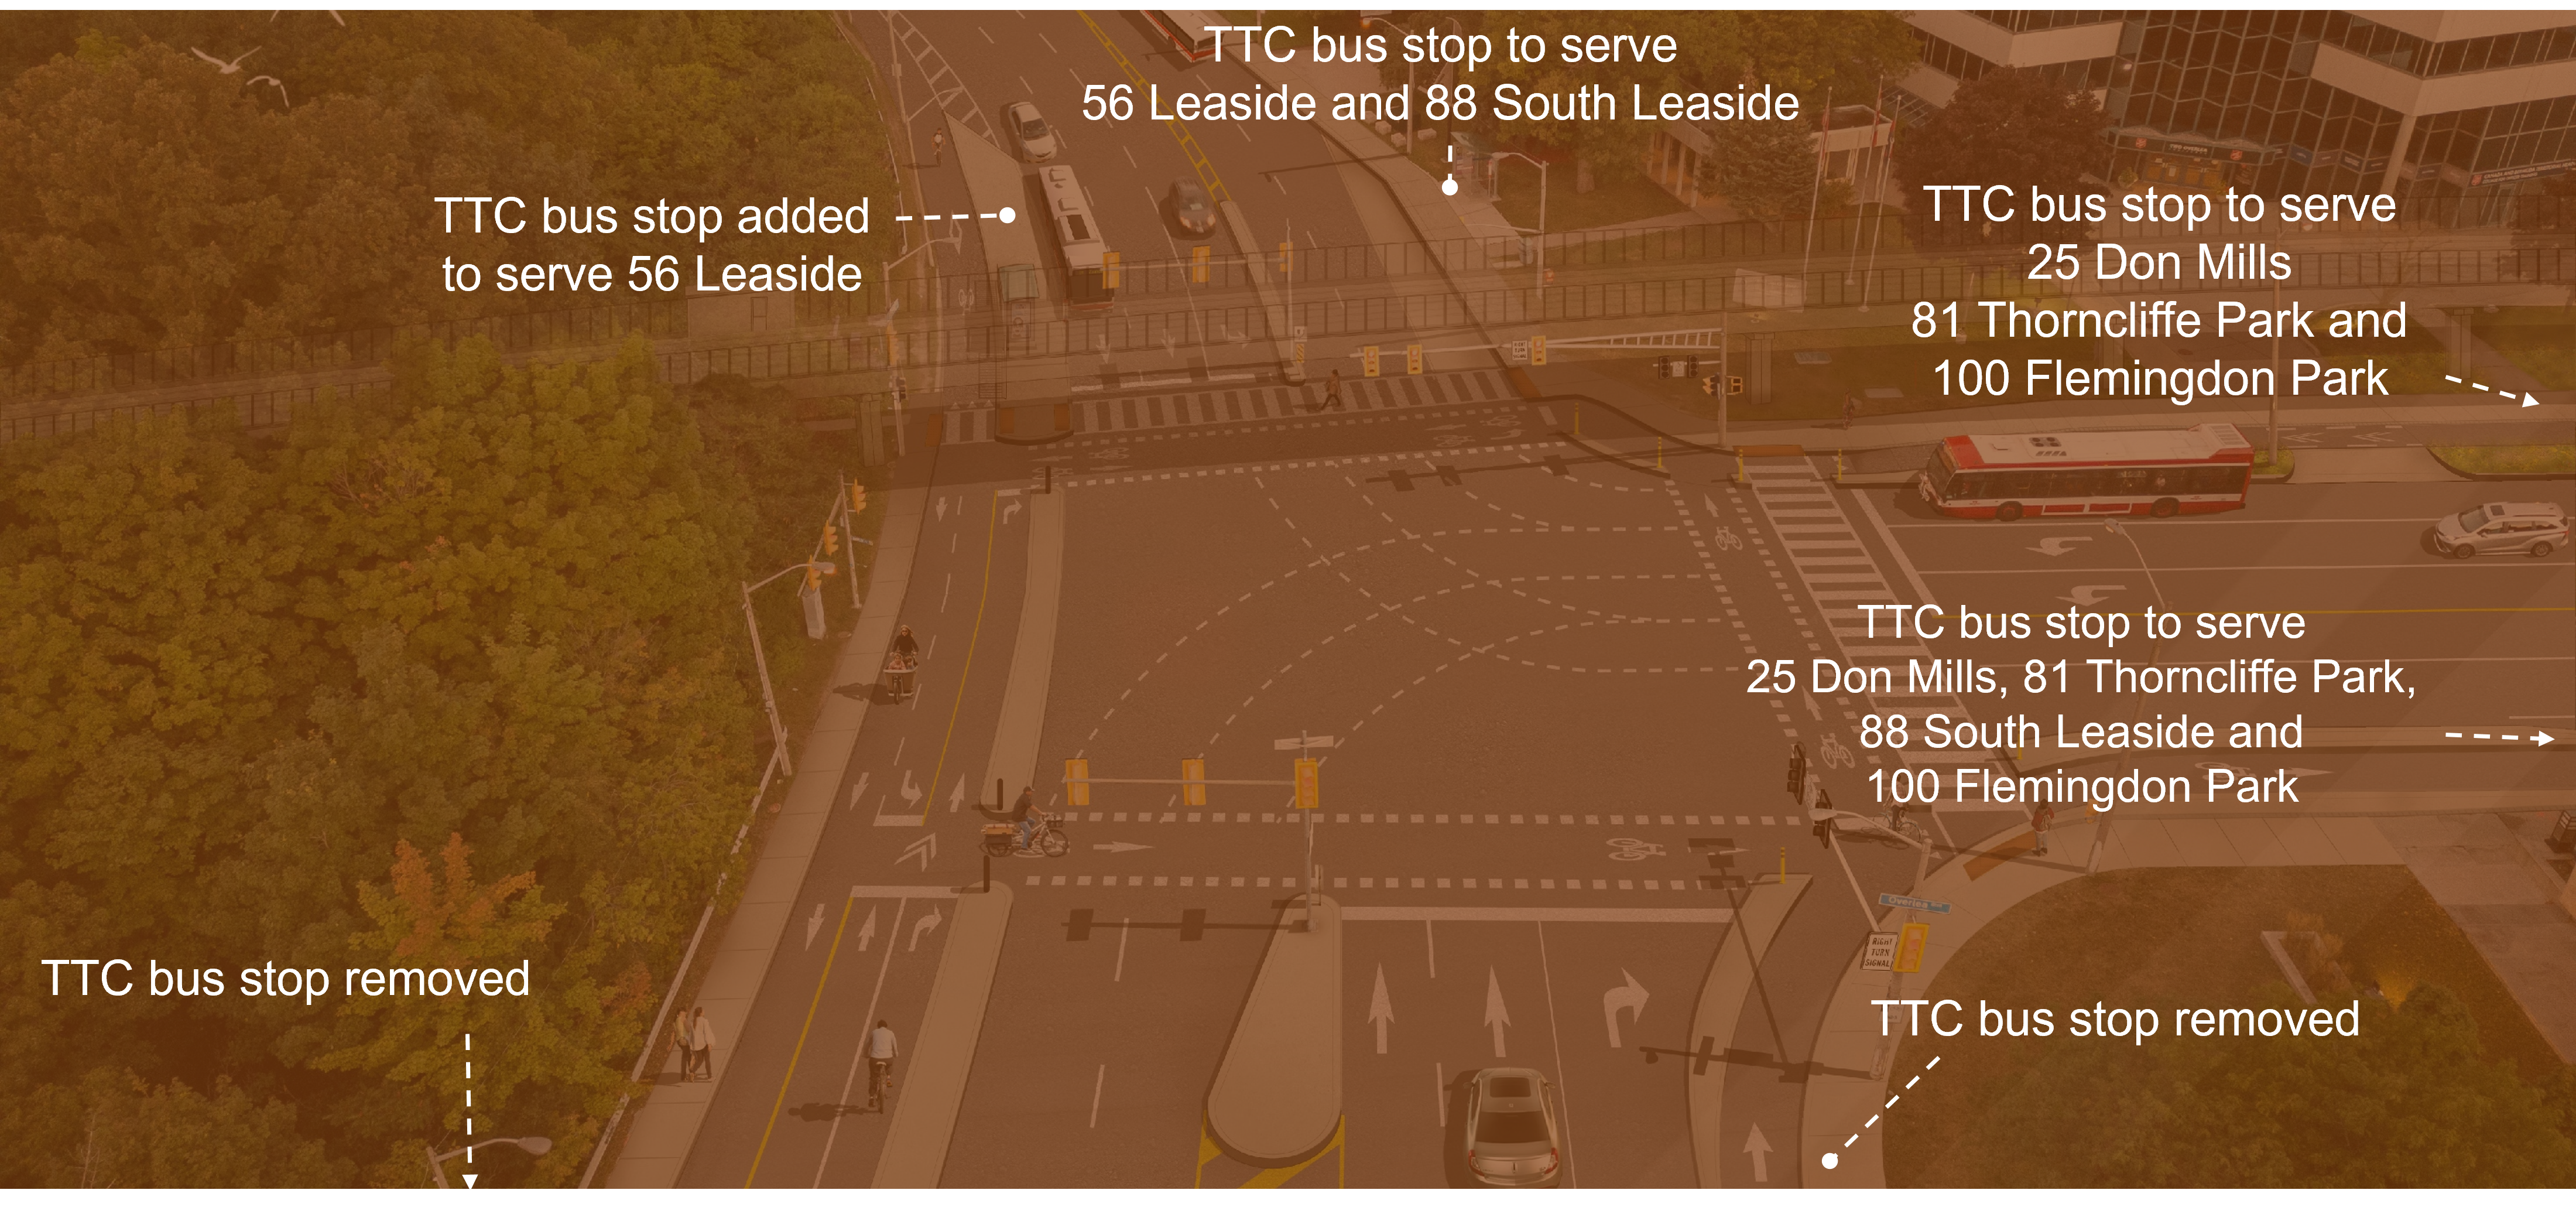 Overview of the proposed bus stop changes.